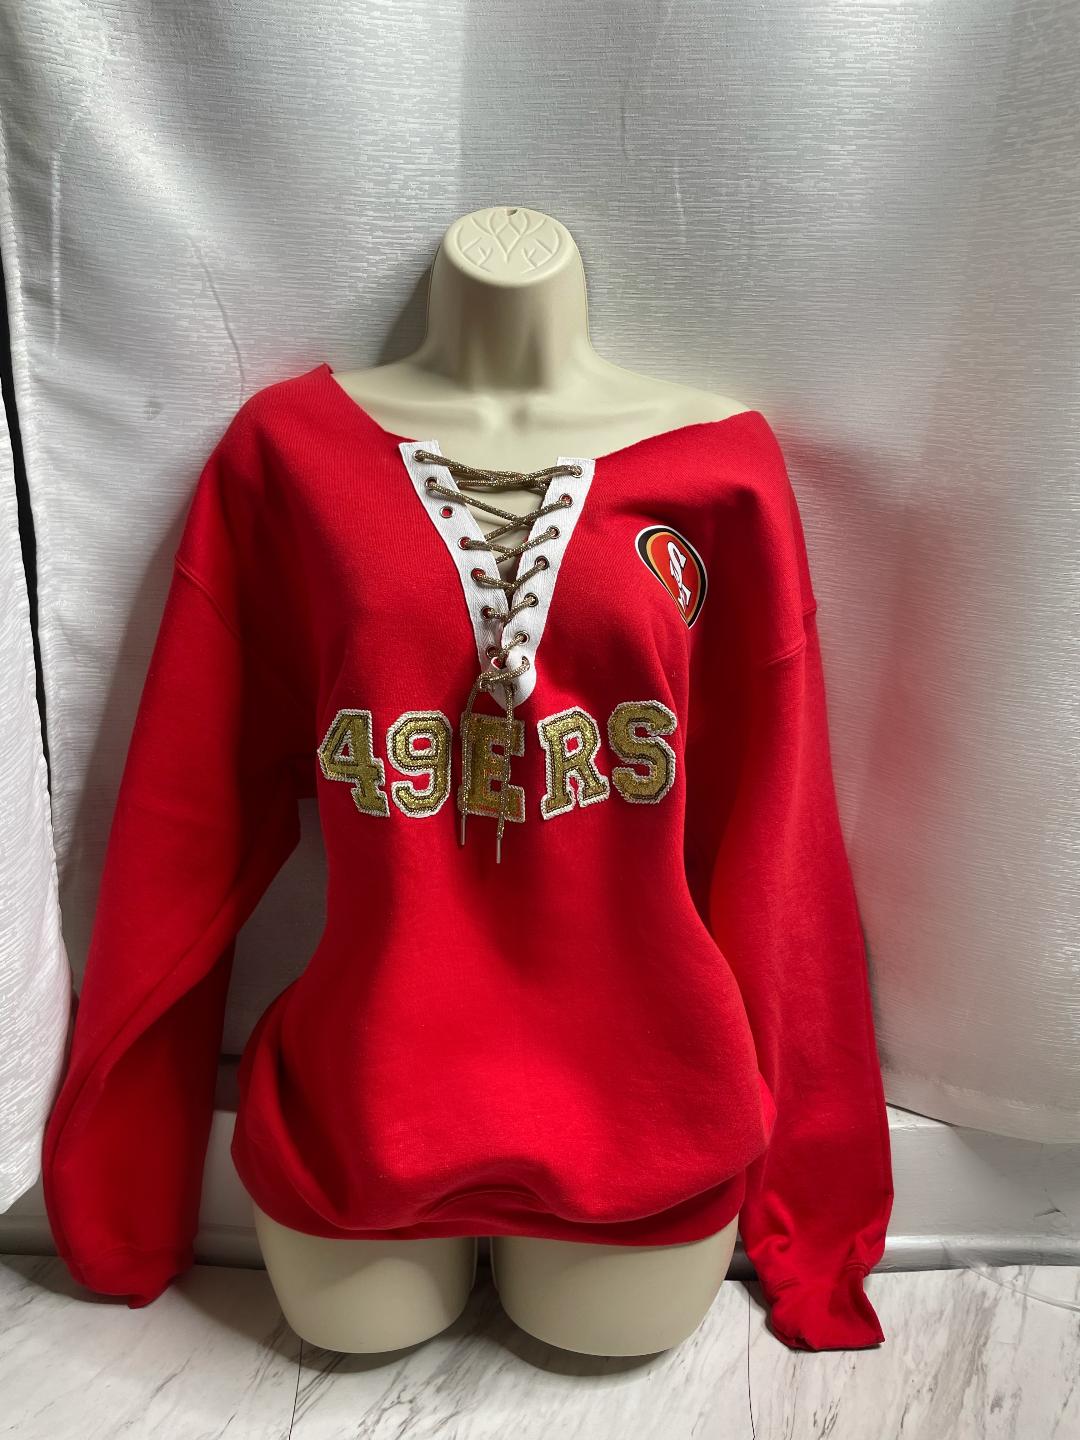 Free XXXL 49ers Sweatshirt! It's in perfect shape, but I've lost 90 lbs. in  the past year and it went from too small to too big. I'll mail the  sweatshirt to the